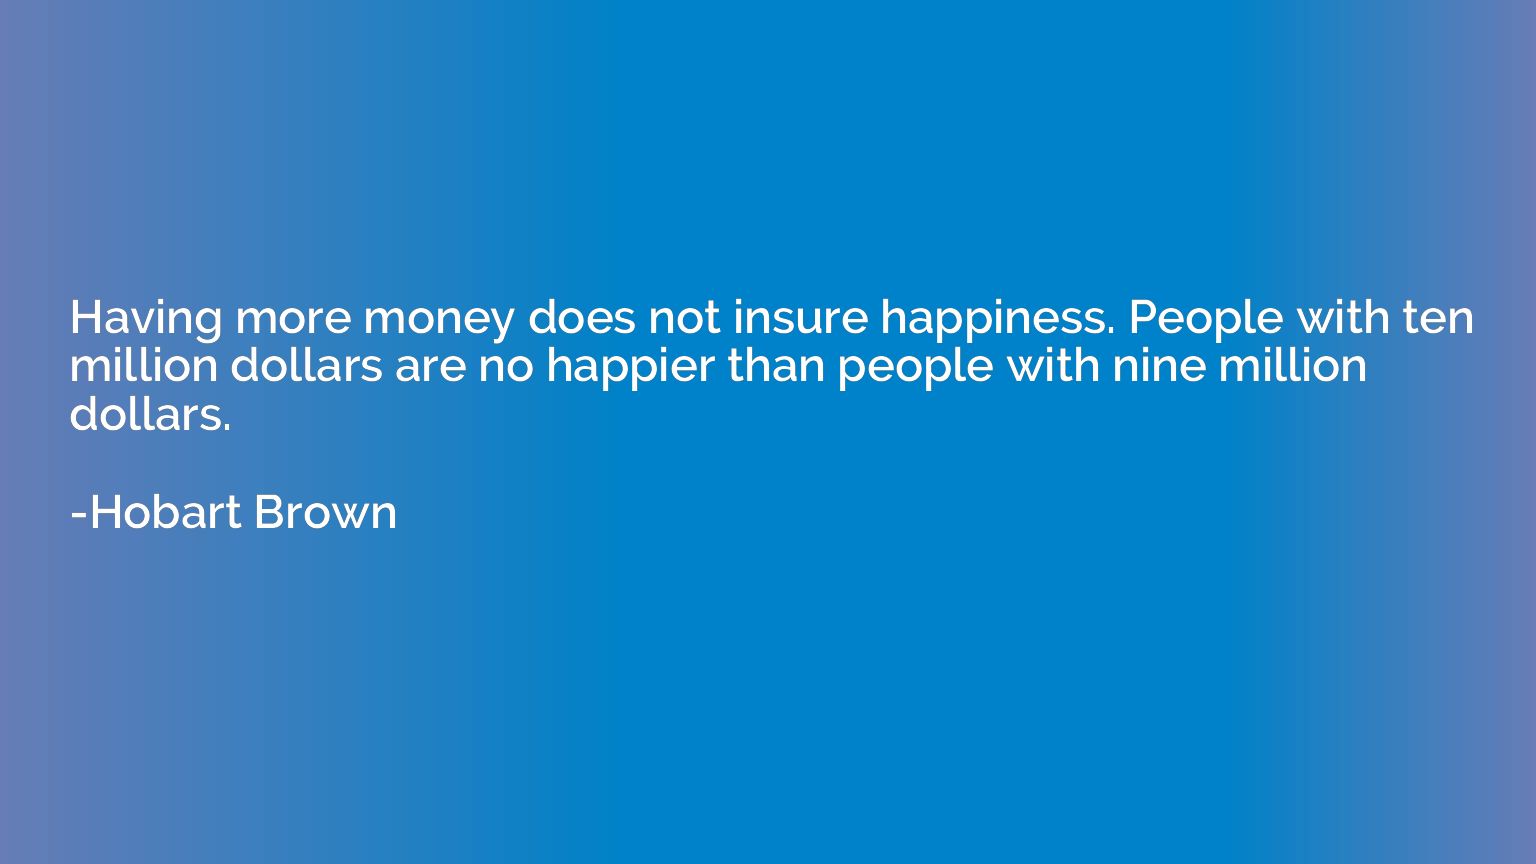 Having more money does not insure happiness. People with ten